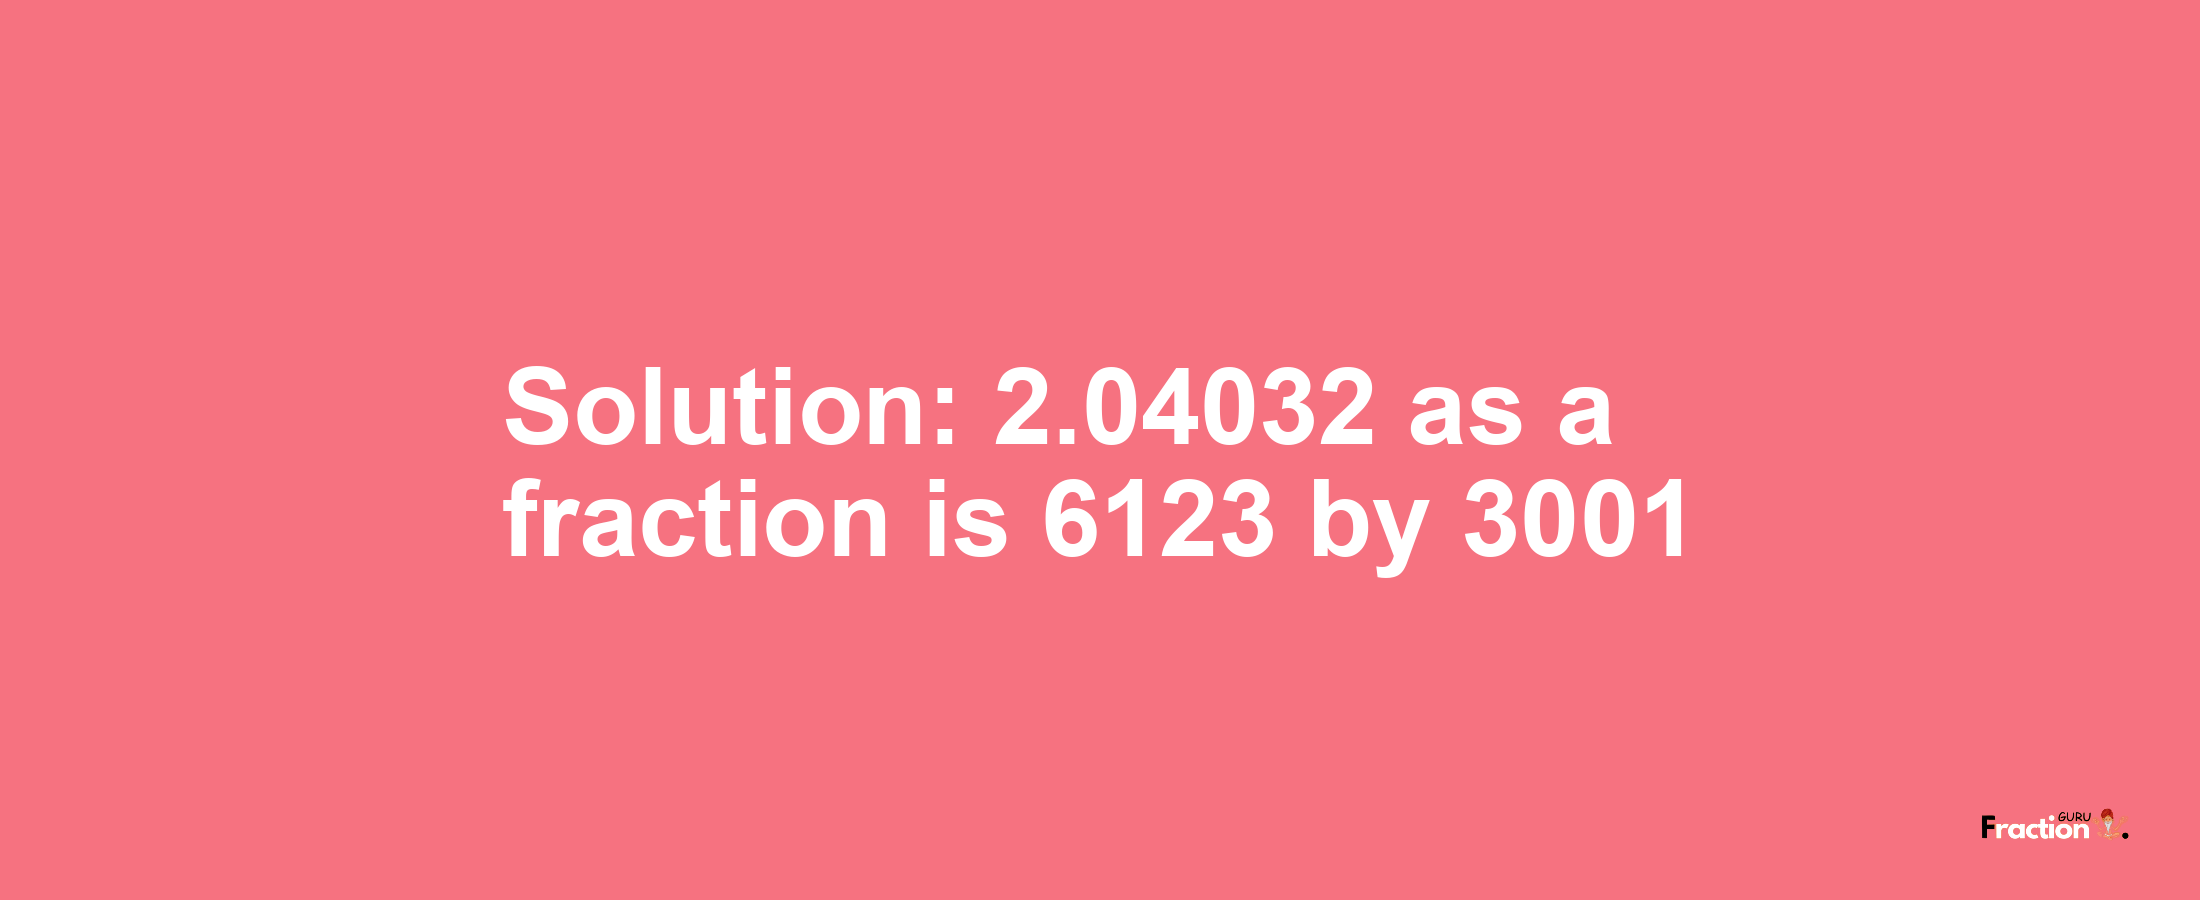 Solution:2.04032 as a fraction is 6123/3001